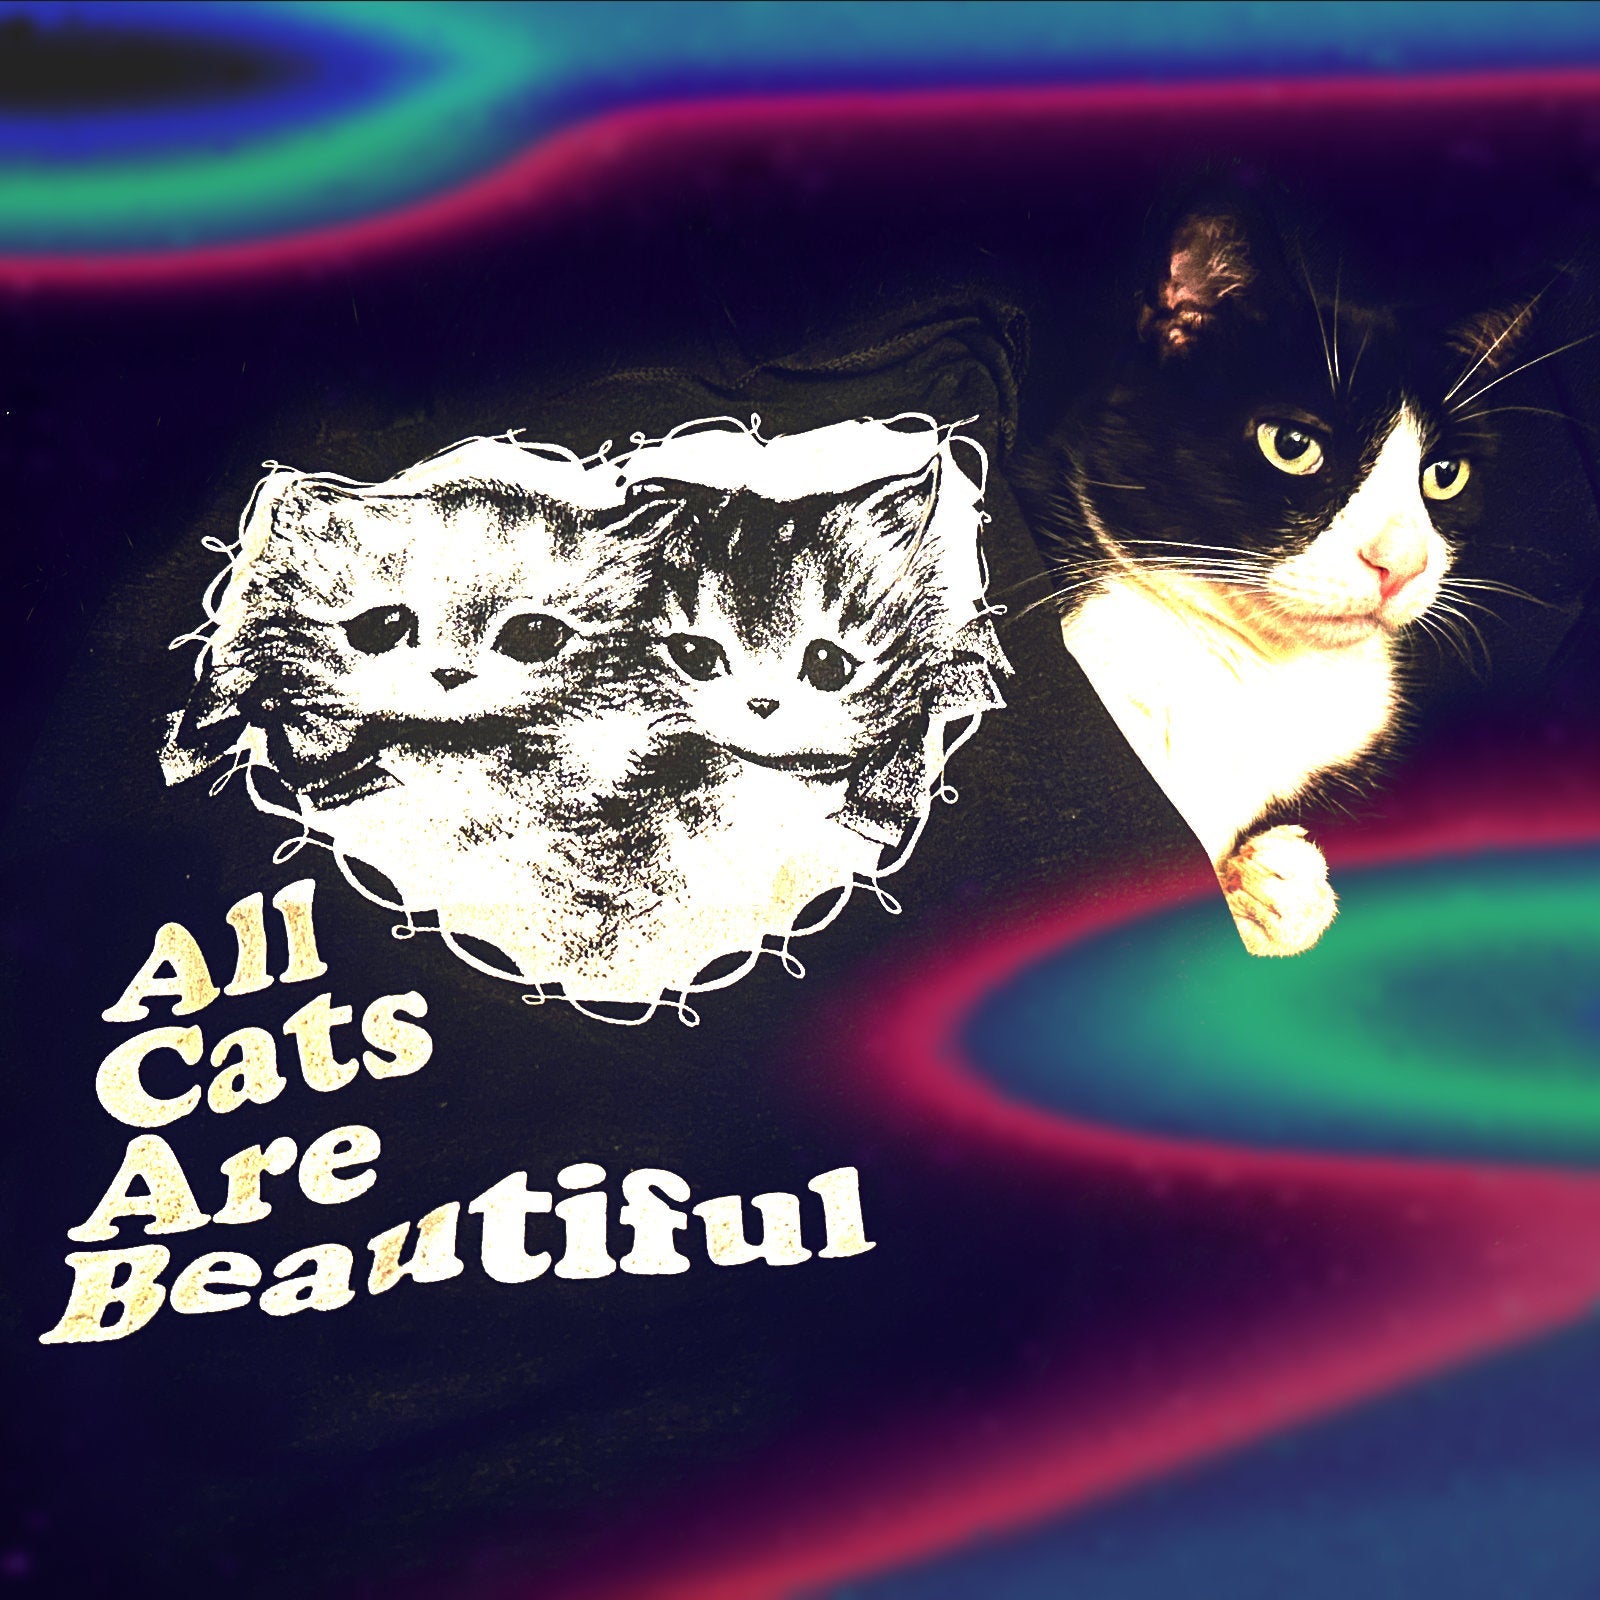 All Cats Are Beautiful Classic Tee